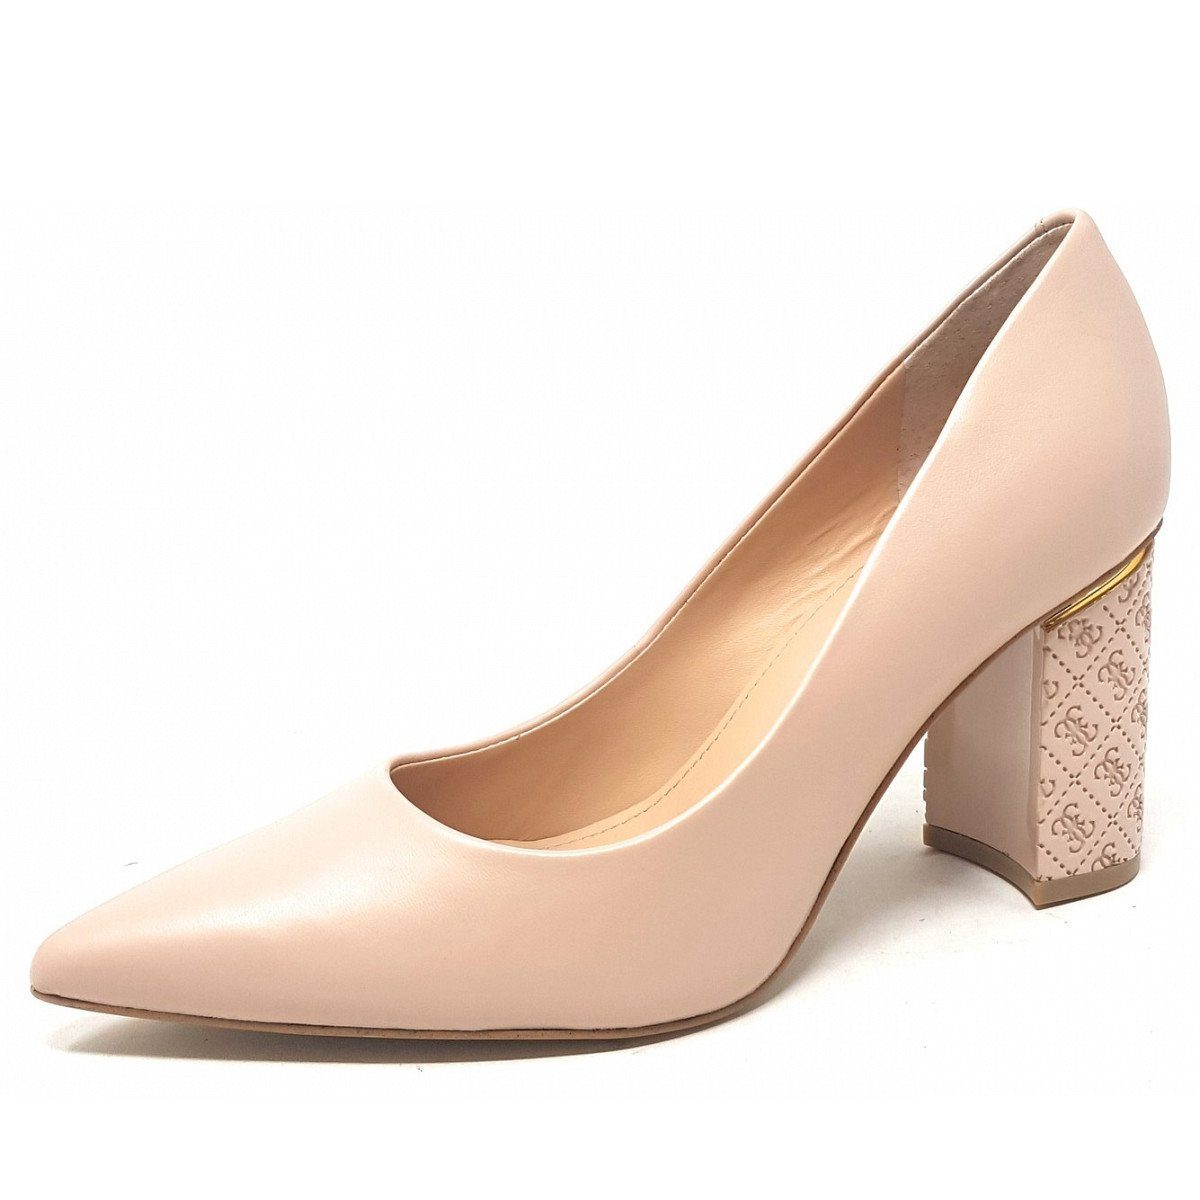 Guess Pumps Pialy